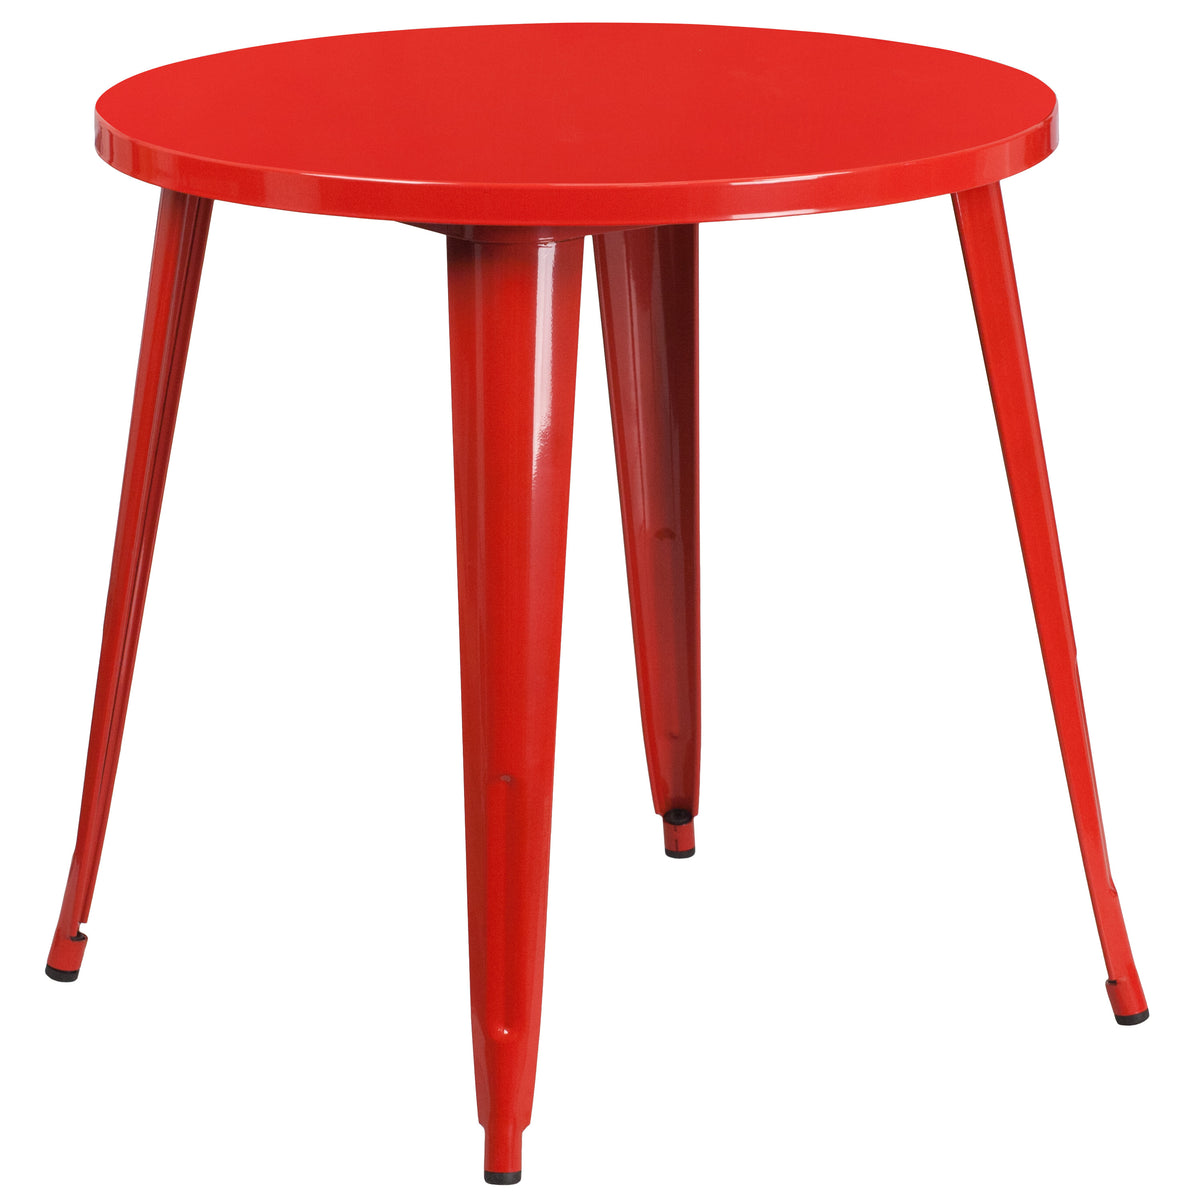 Red |#| 30inch Round Red Metal Indoor-Outdoor Table Set with 2 Cafe Chairs